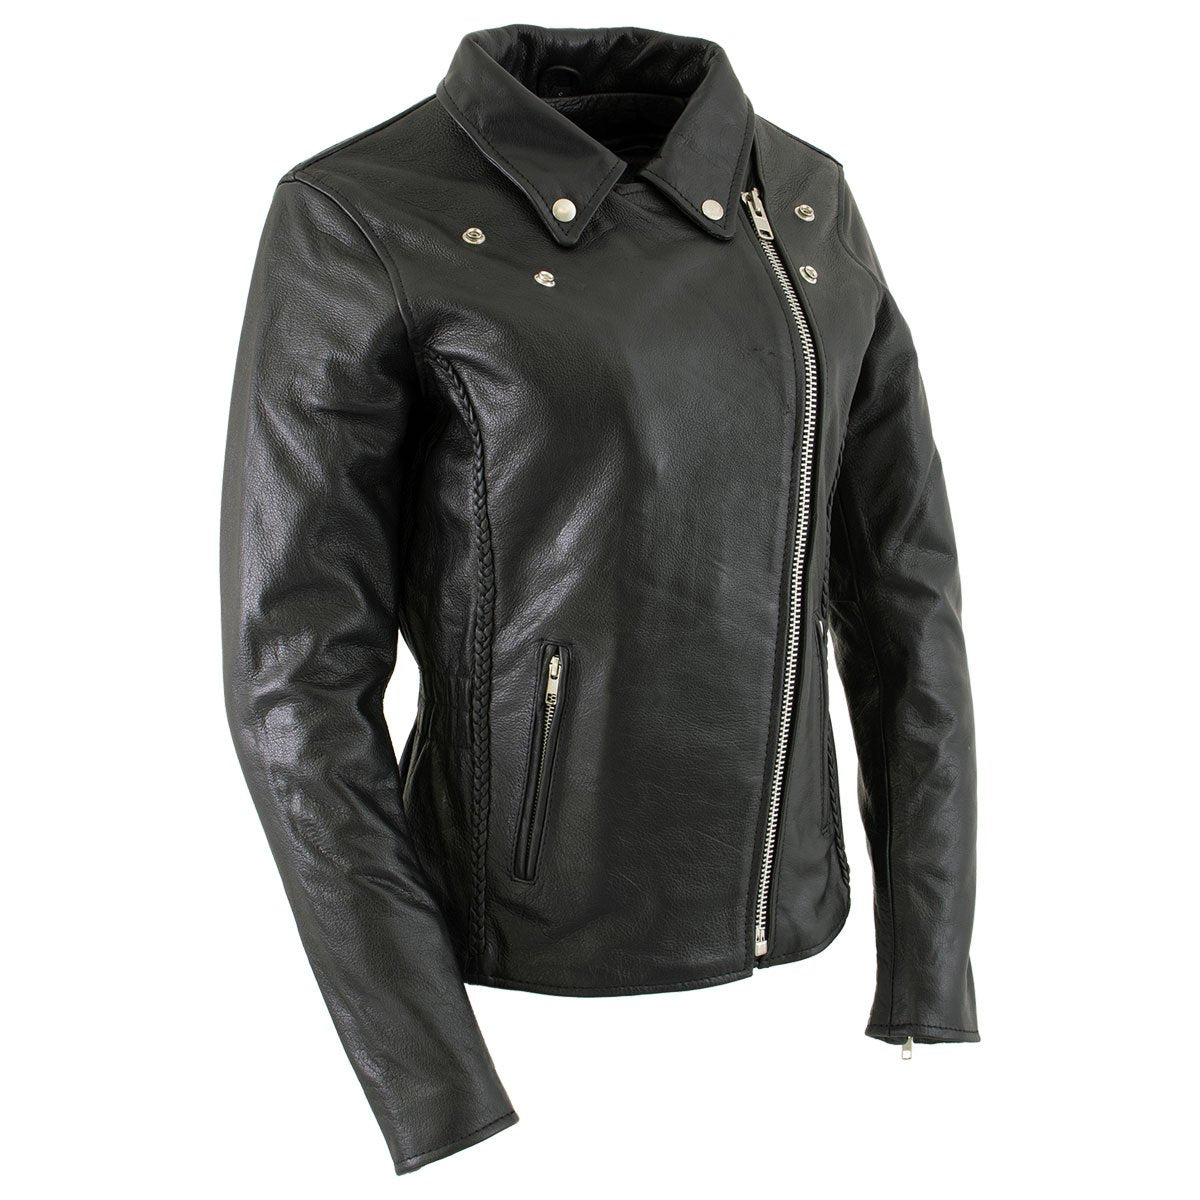 Xelement B8000 Black Motorcycle Leather Jacket for Women - Ladies Real ...